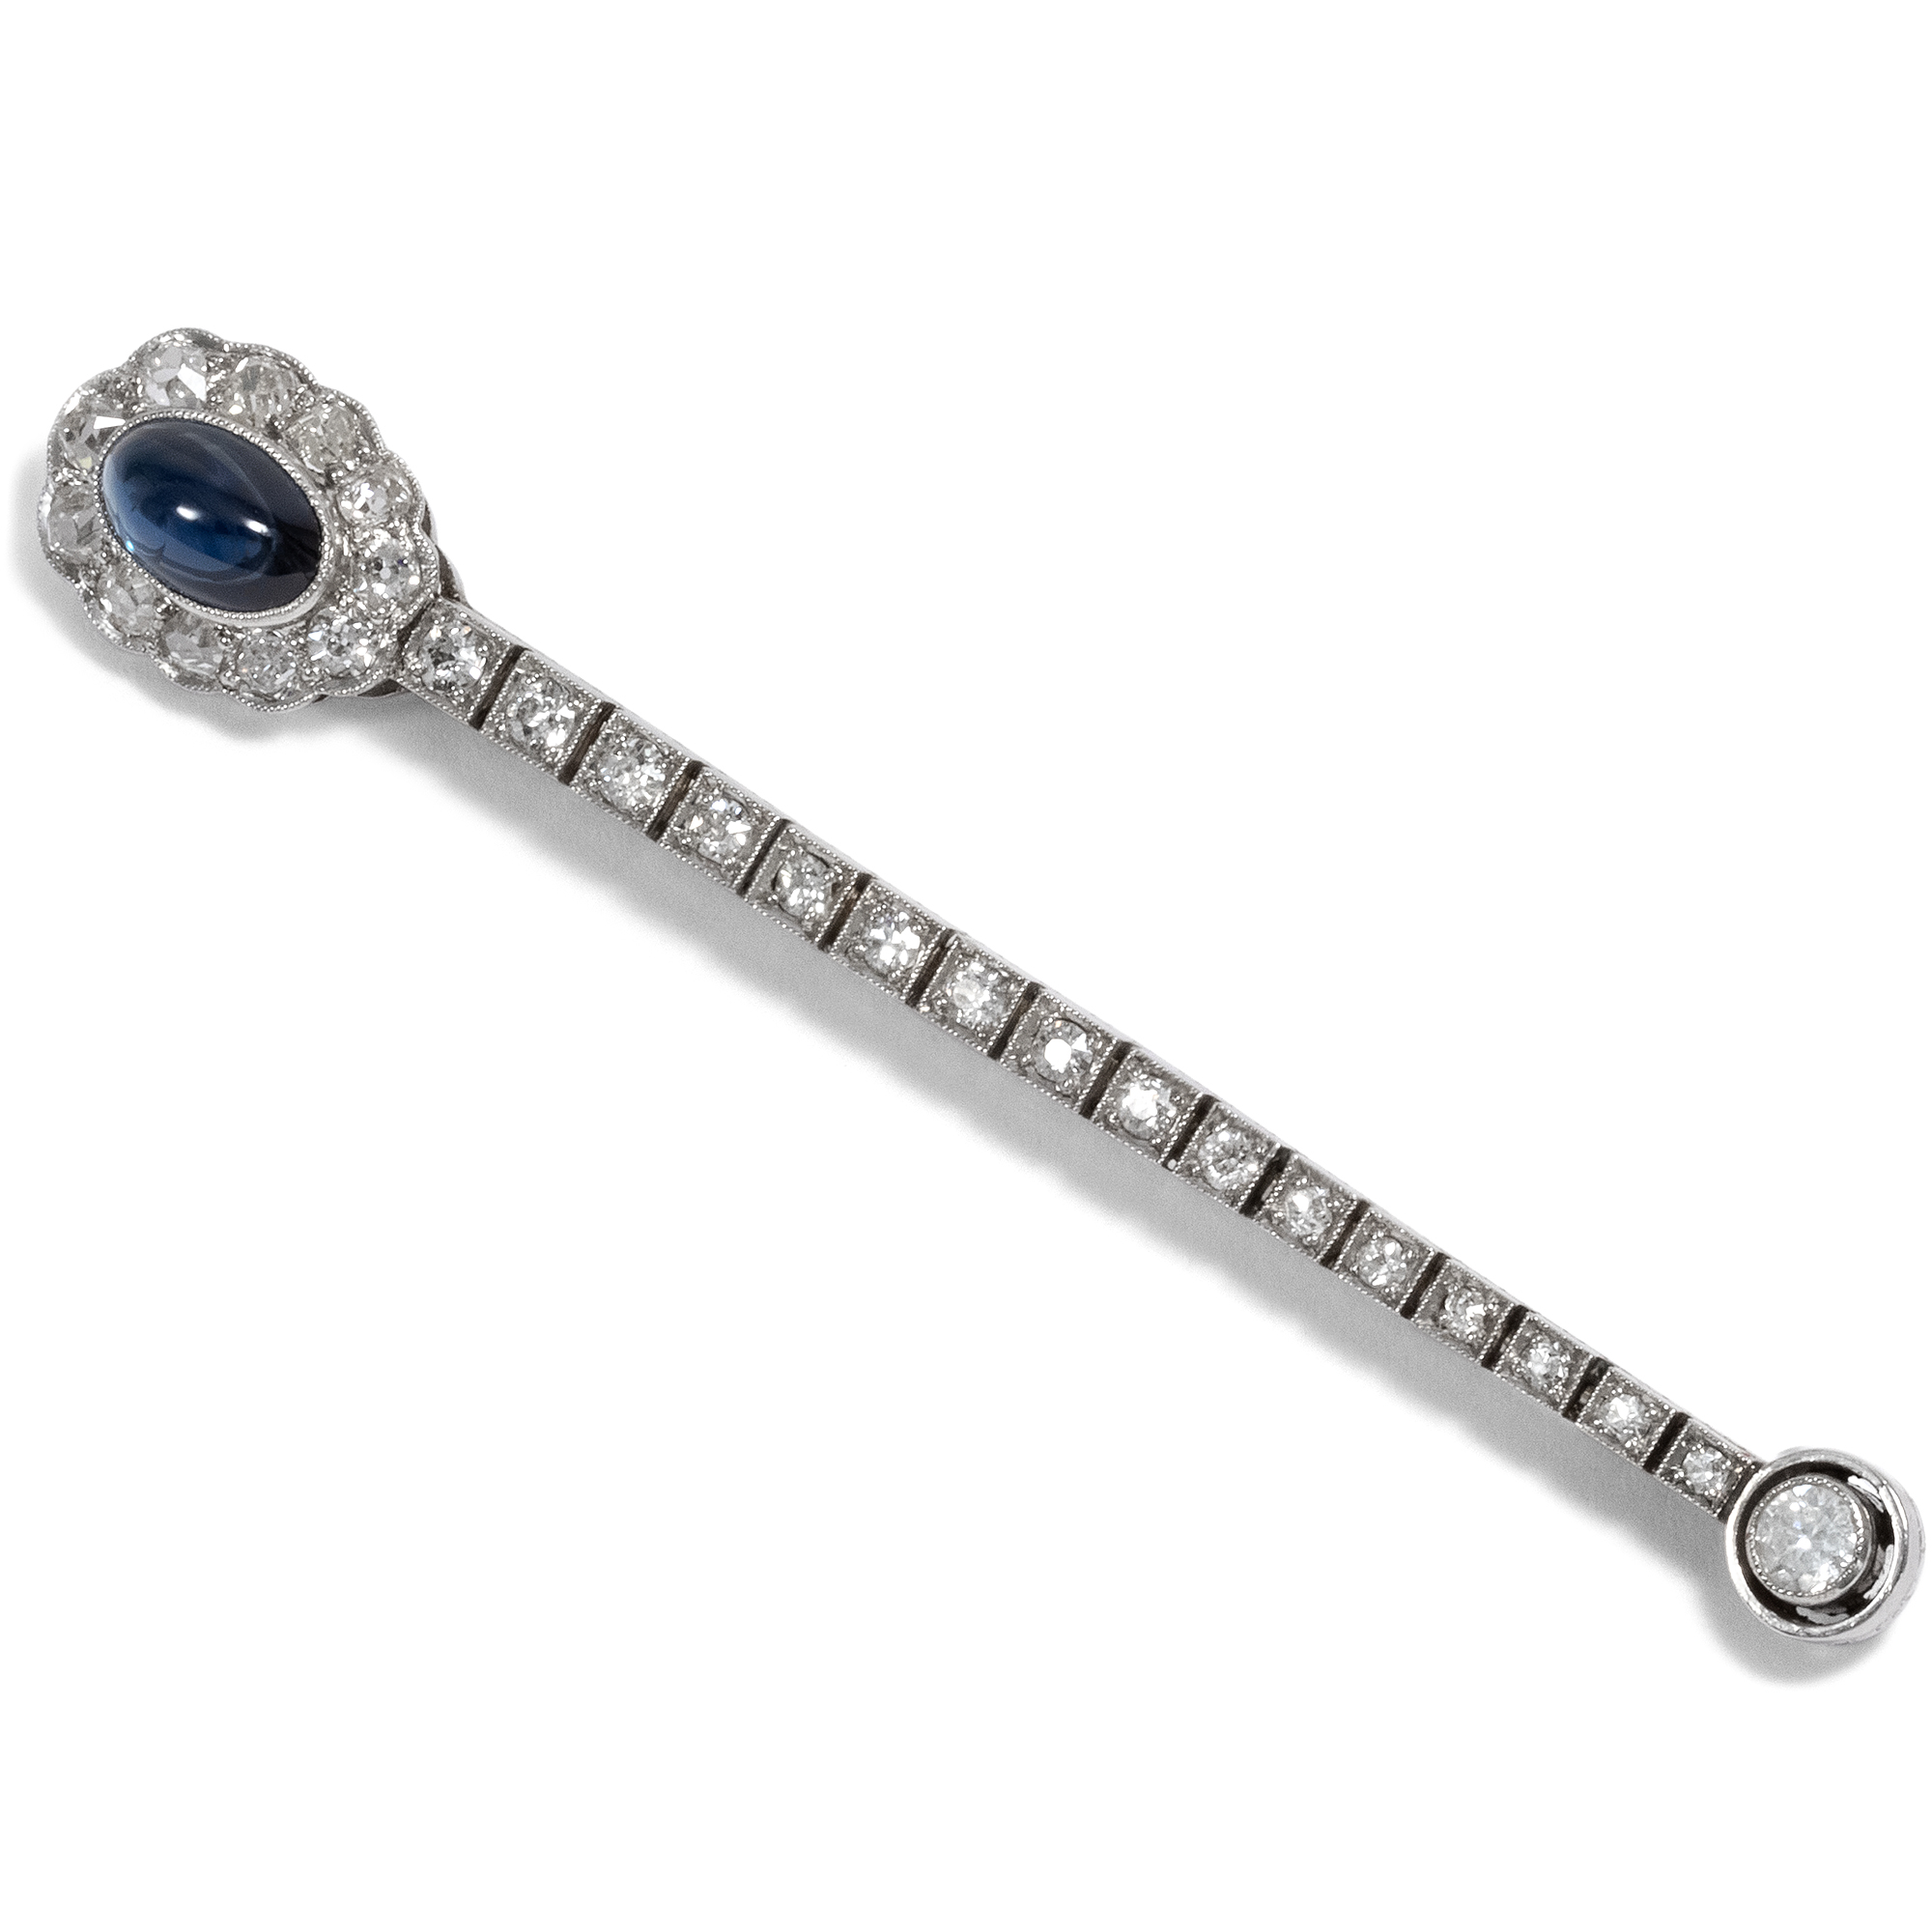 Antique Brooch with Sapphire & Diamonds in Platinum & Gold, c. 1910